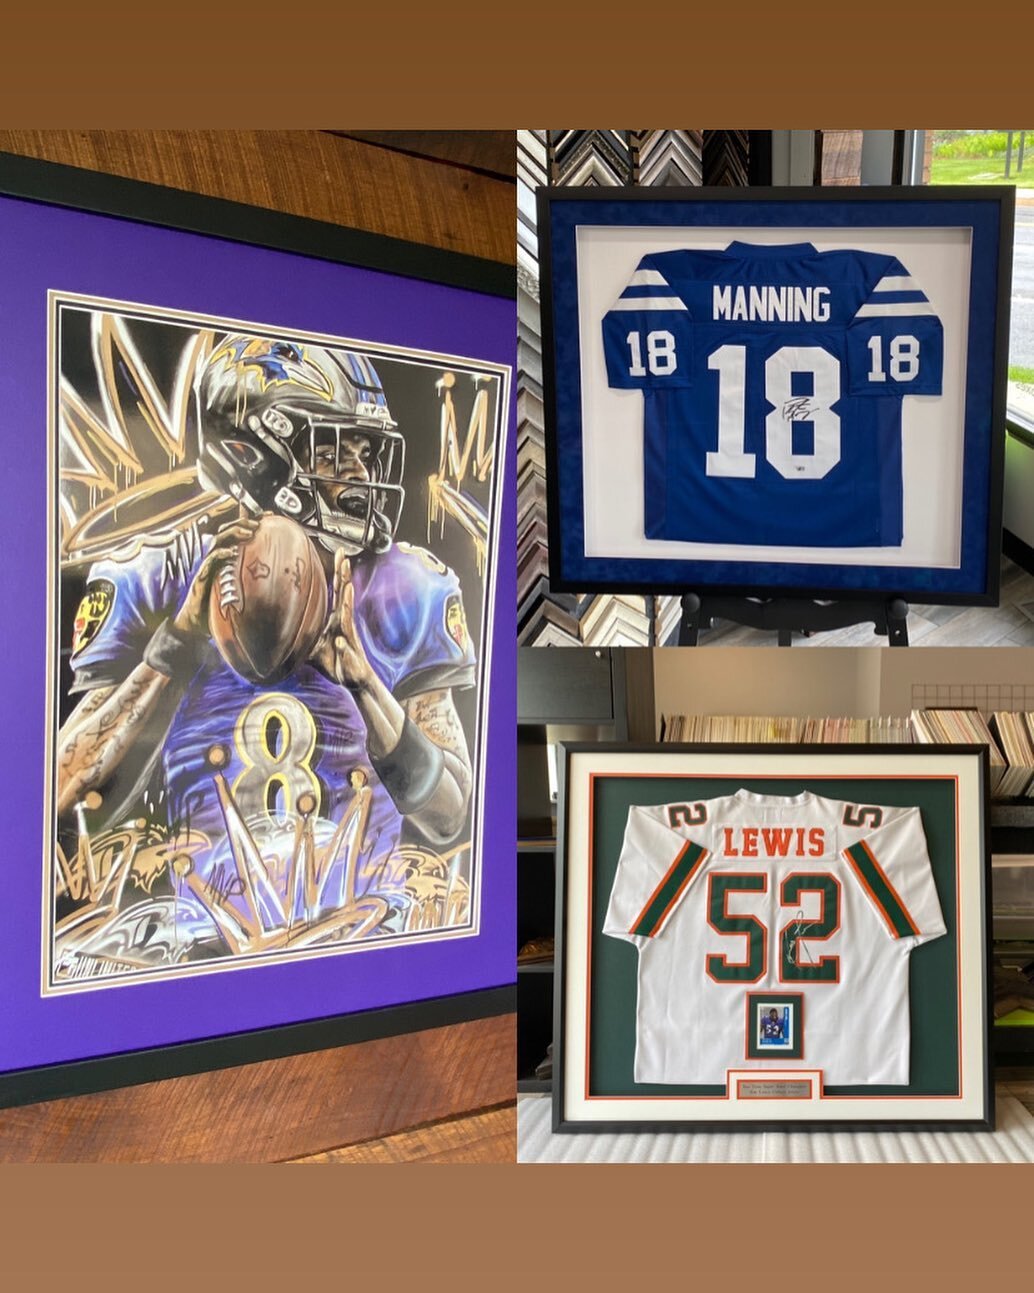 Who&rsquo;s your favorite player past or present? Ray Lewis college jersey. Lamar by local artist. #smallbusiness #harfordcounty #downtownbelairmd #supportlocal #belairmaryland